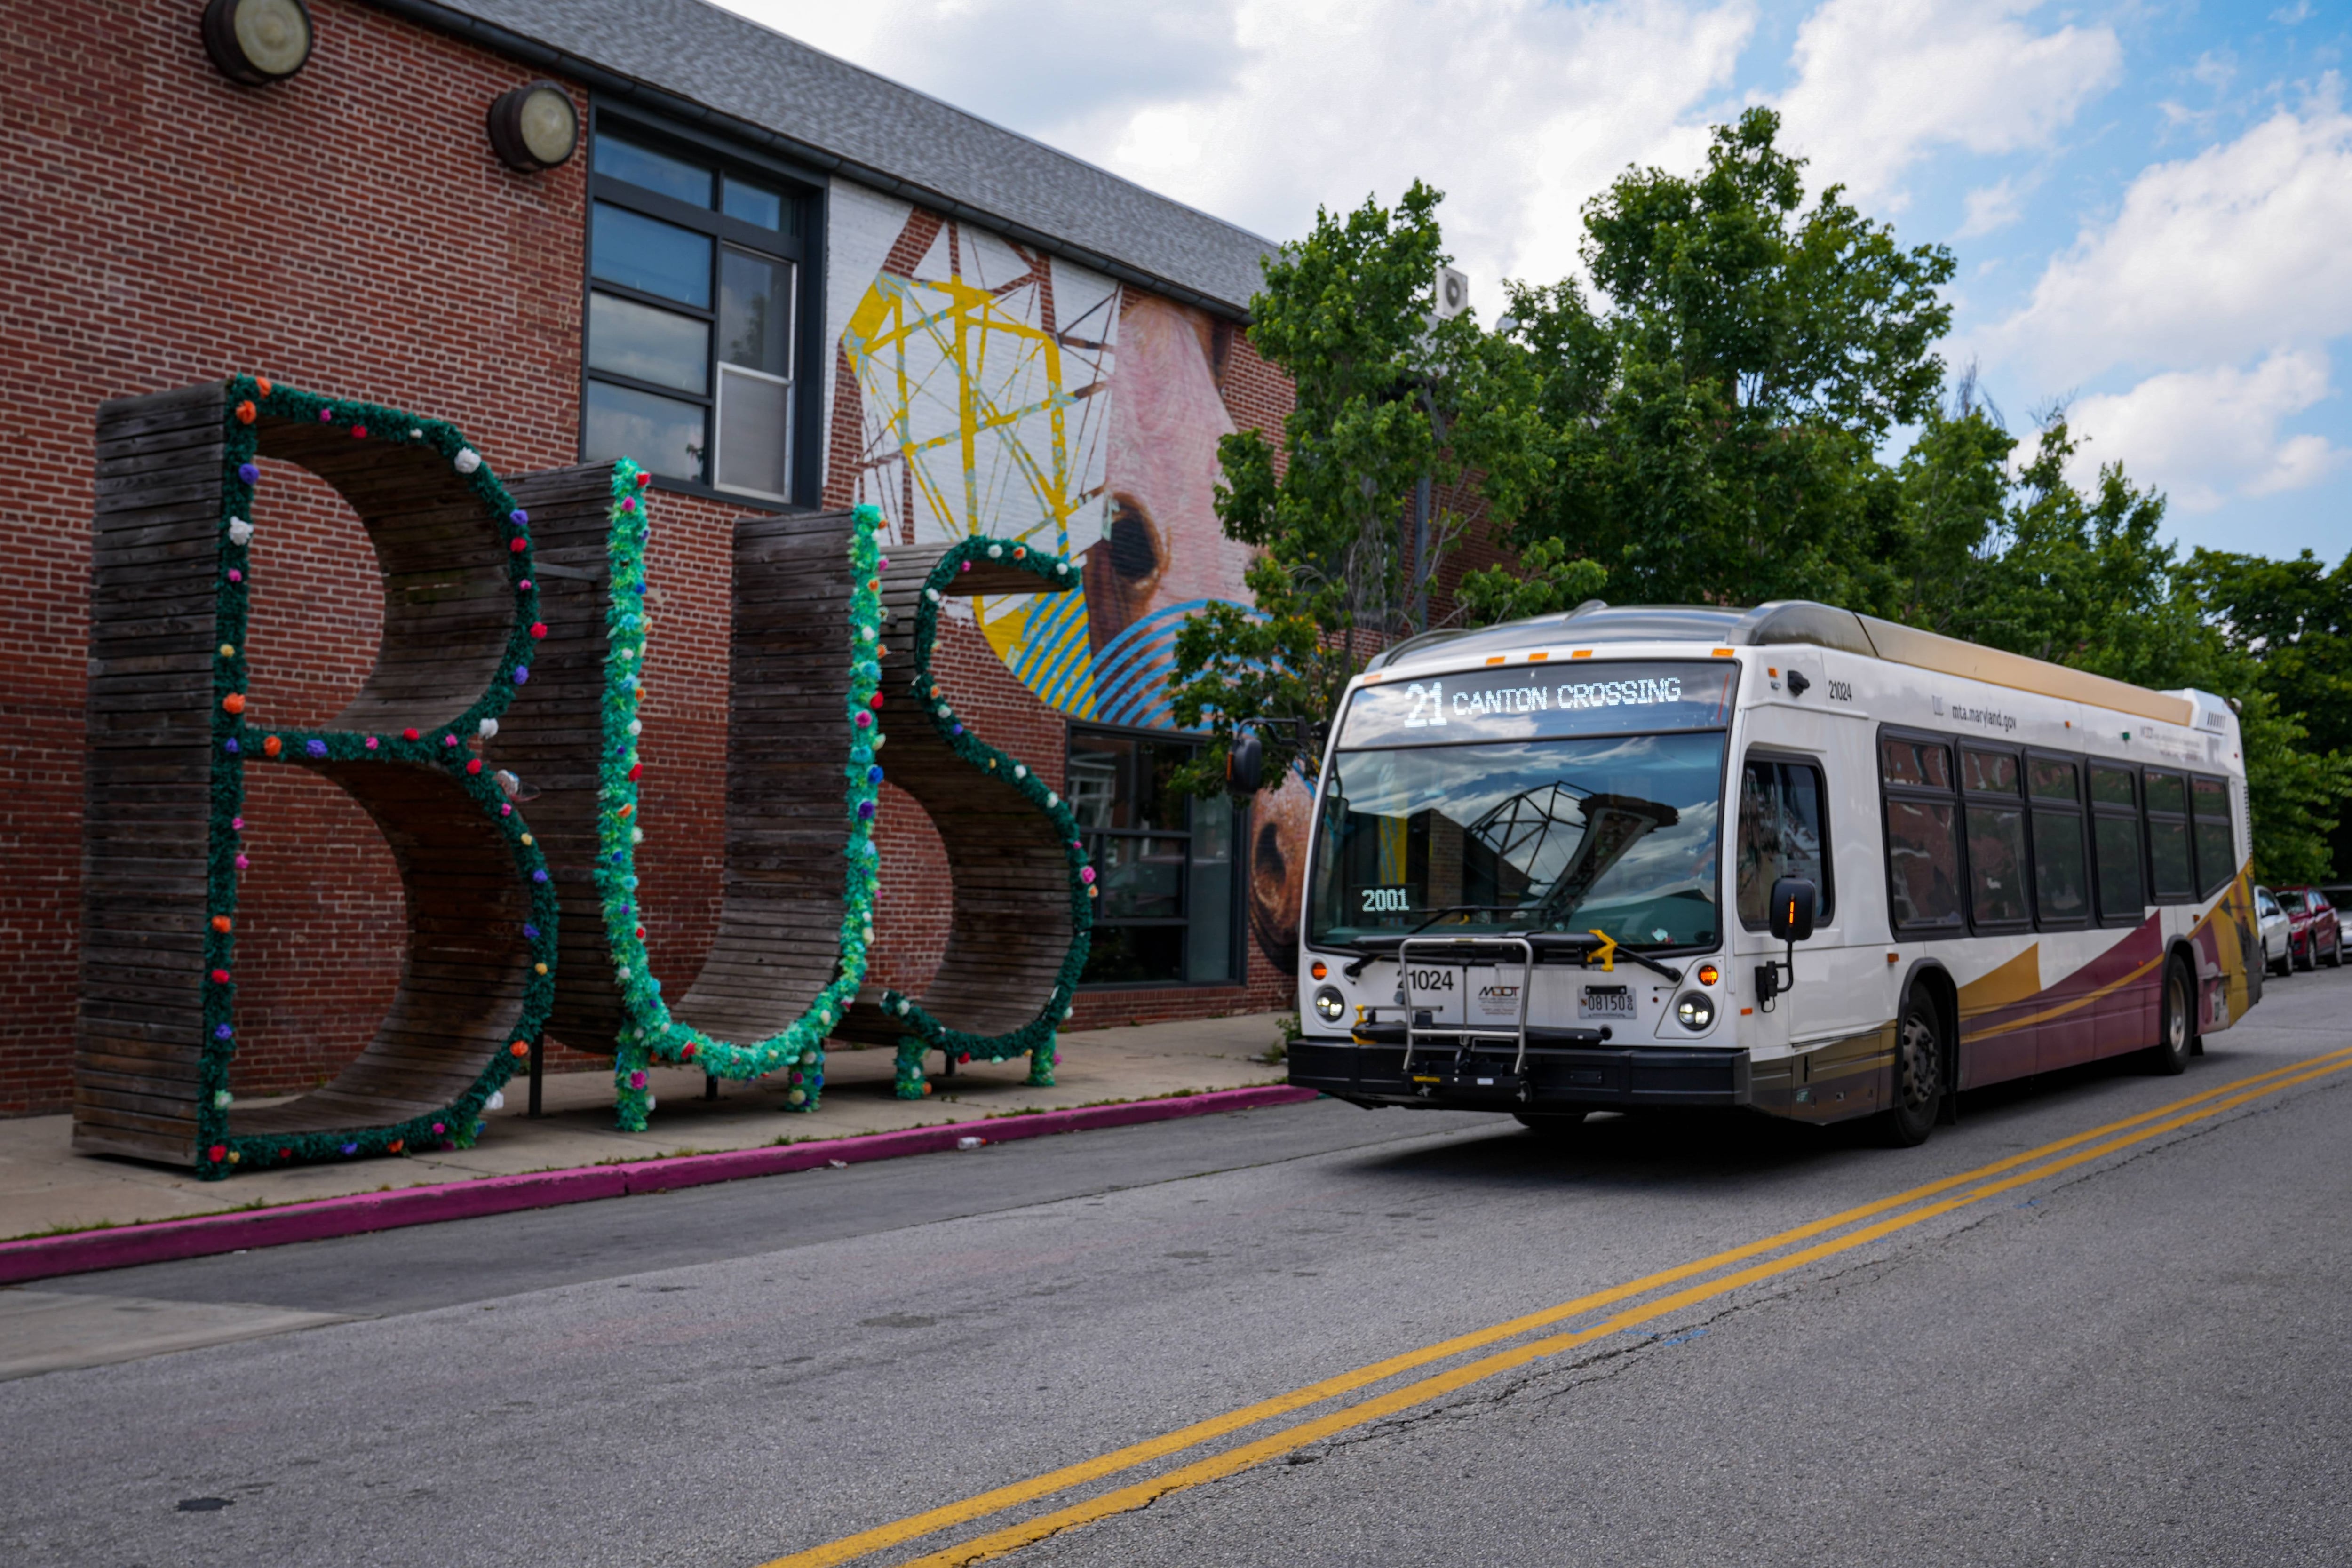 6/8/22—A Baltimore City Bus drives past the BUS shaped bus stop outside of the Creative Alliance art center in Highlandtown.